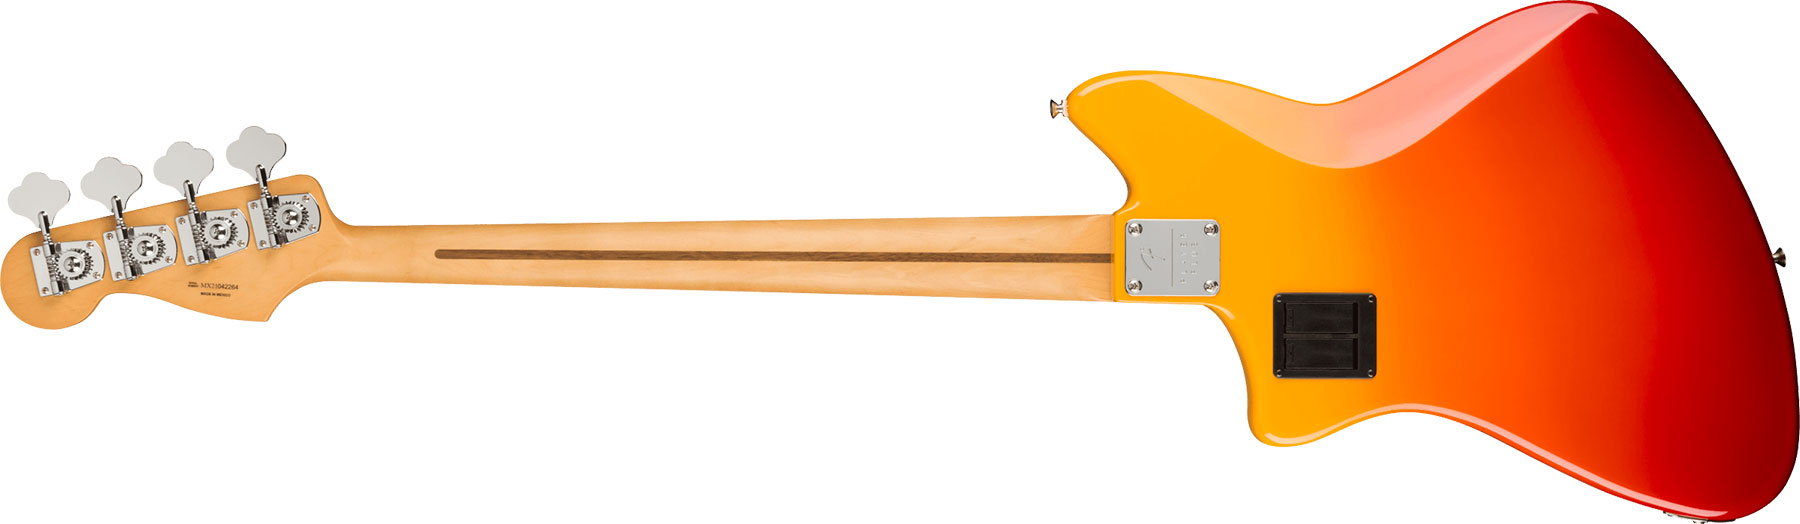 Fender Meteora Bass Active Player Plus Mex Pf - Tequila Sunrise - Solid body electric bass - Variation 1